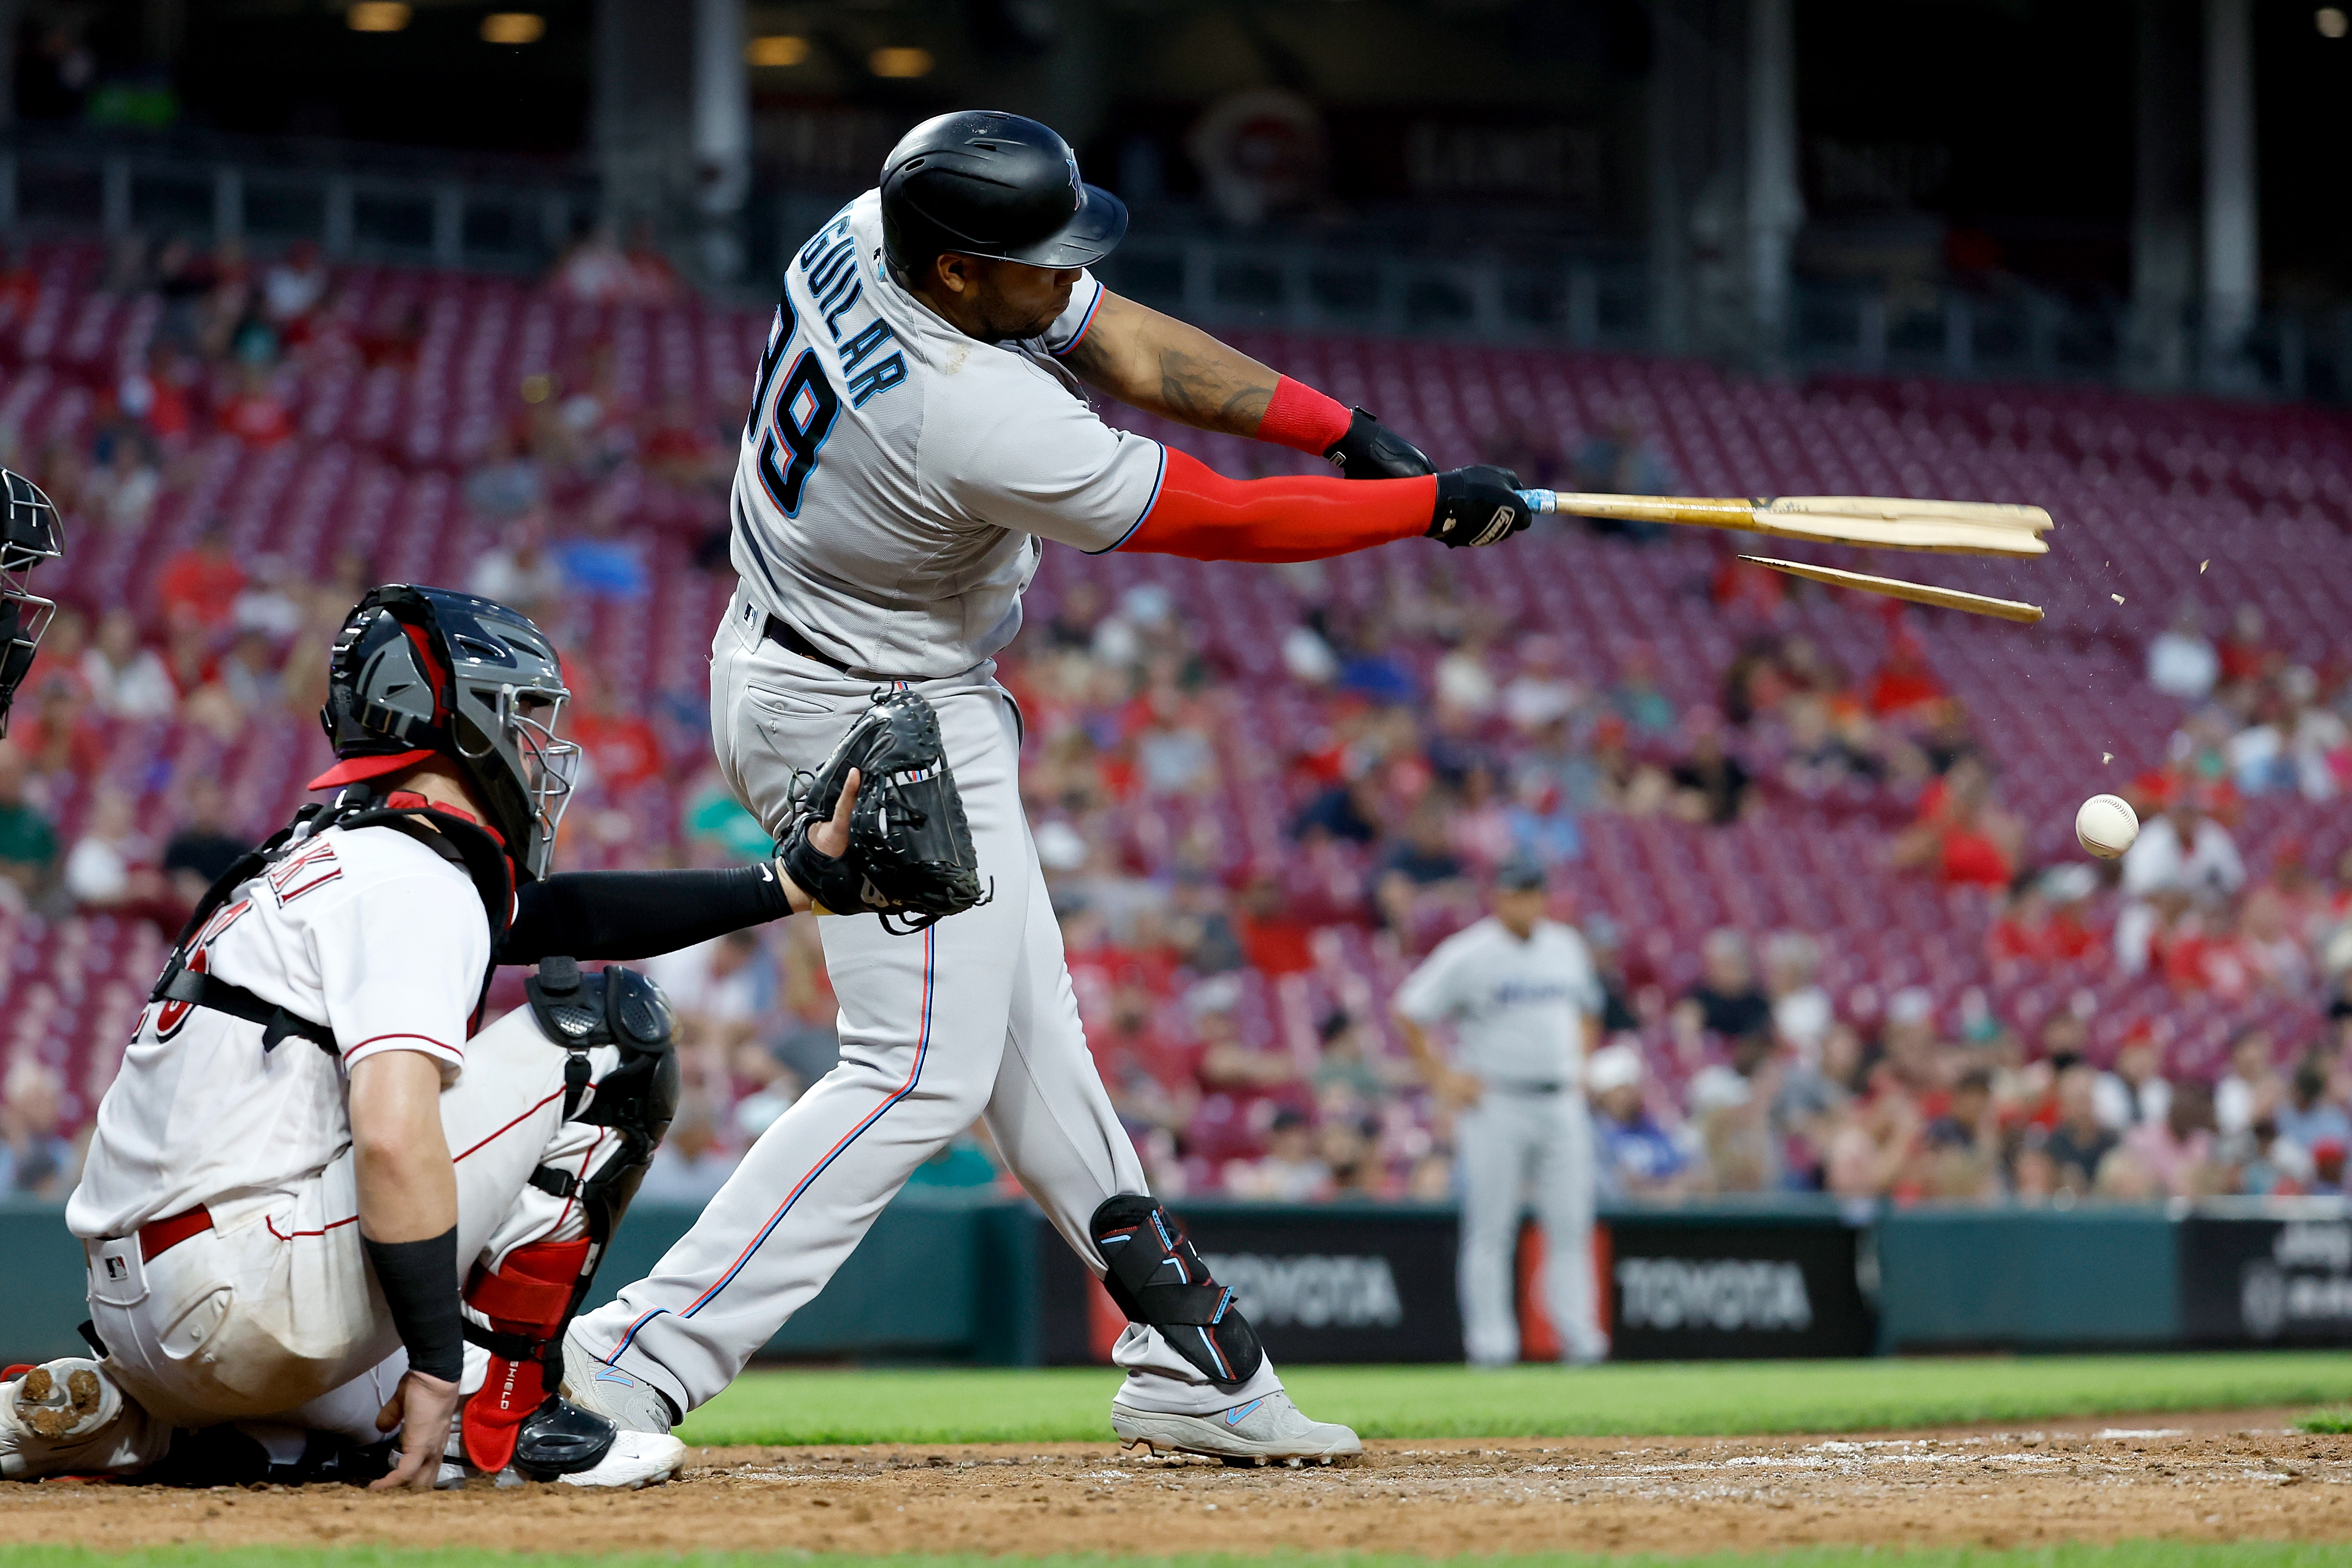 Jesus Aguilar #99 of the Miami Marlins breaks his bat while hitting foul ball during the eighth inning of the game against the Cincinnati Reds at Great American Ball Park on July 27, 2022 in Cincinnati, Ohio. Cincinnati defeated Miami 5-3.